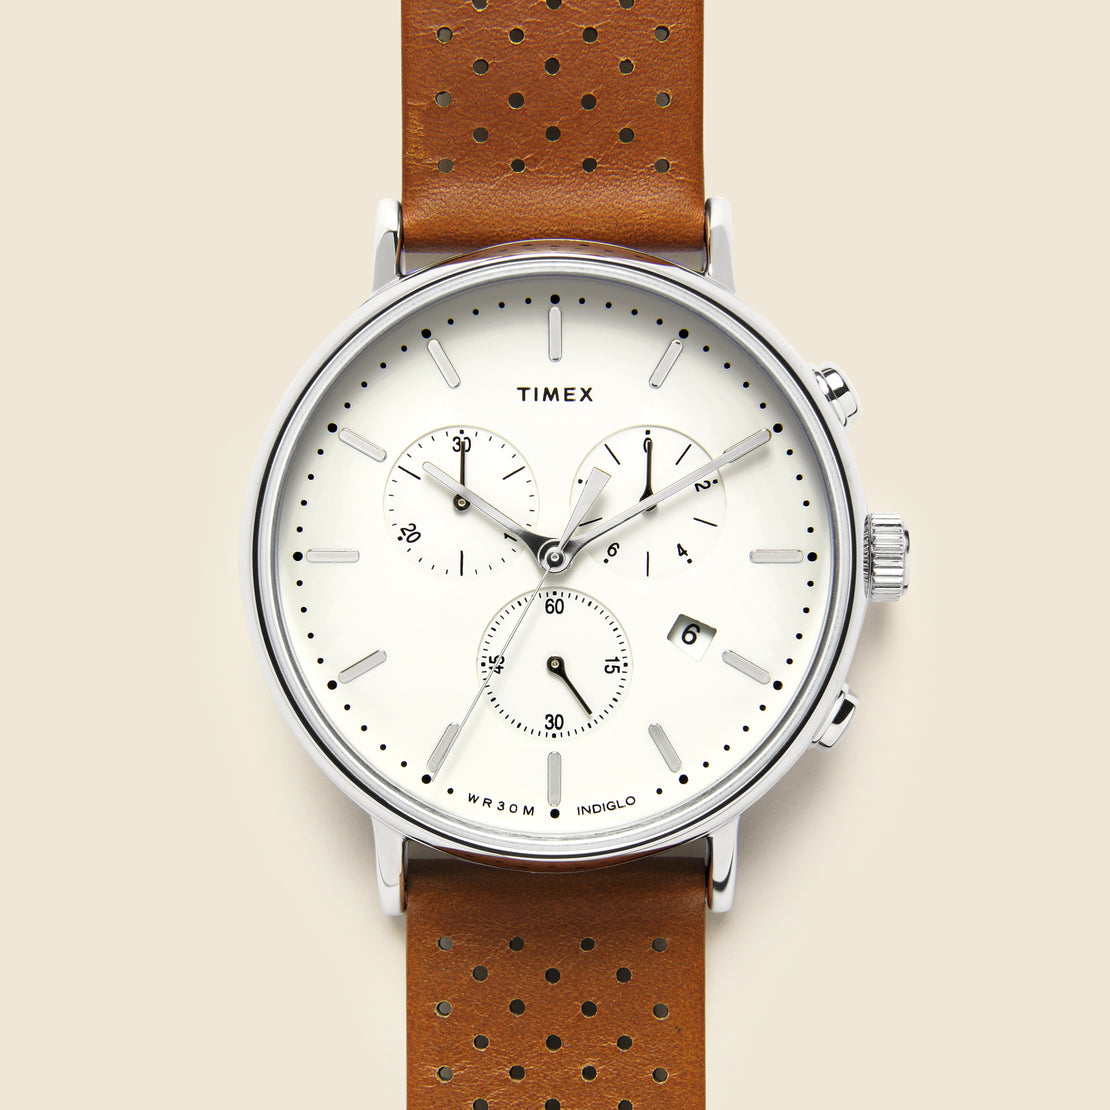 Timex Fairfield Chronograph Leather Strap Watch 41mm - Silver Tone/Tan/White